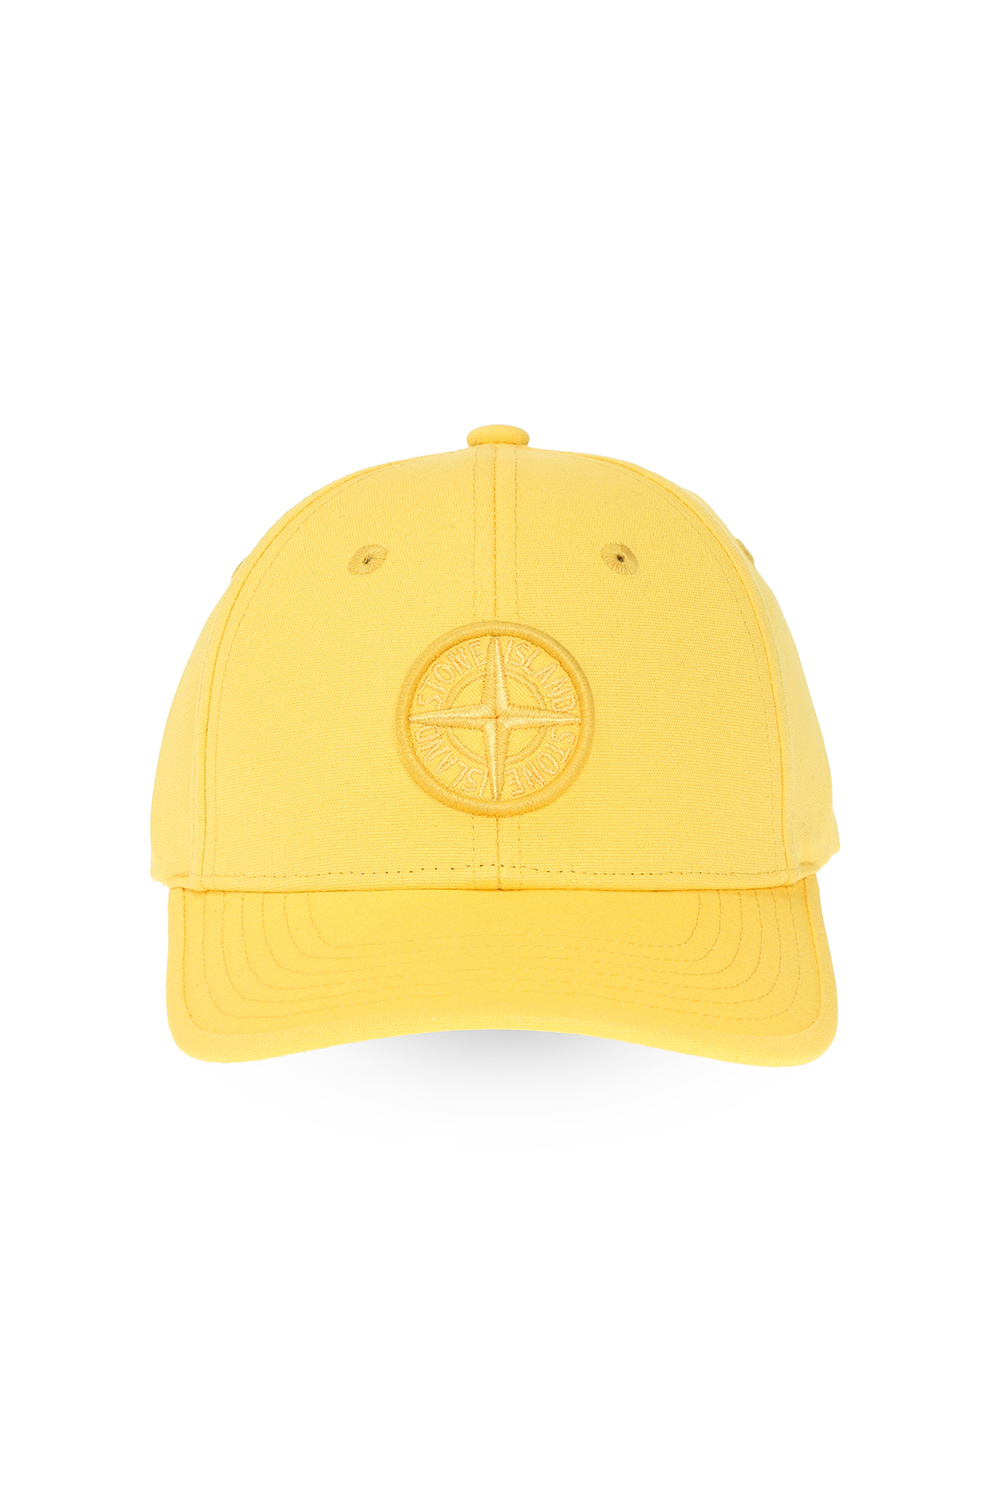 panel cap with embroidered logo in the lower left corner Baseball cap